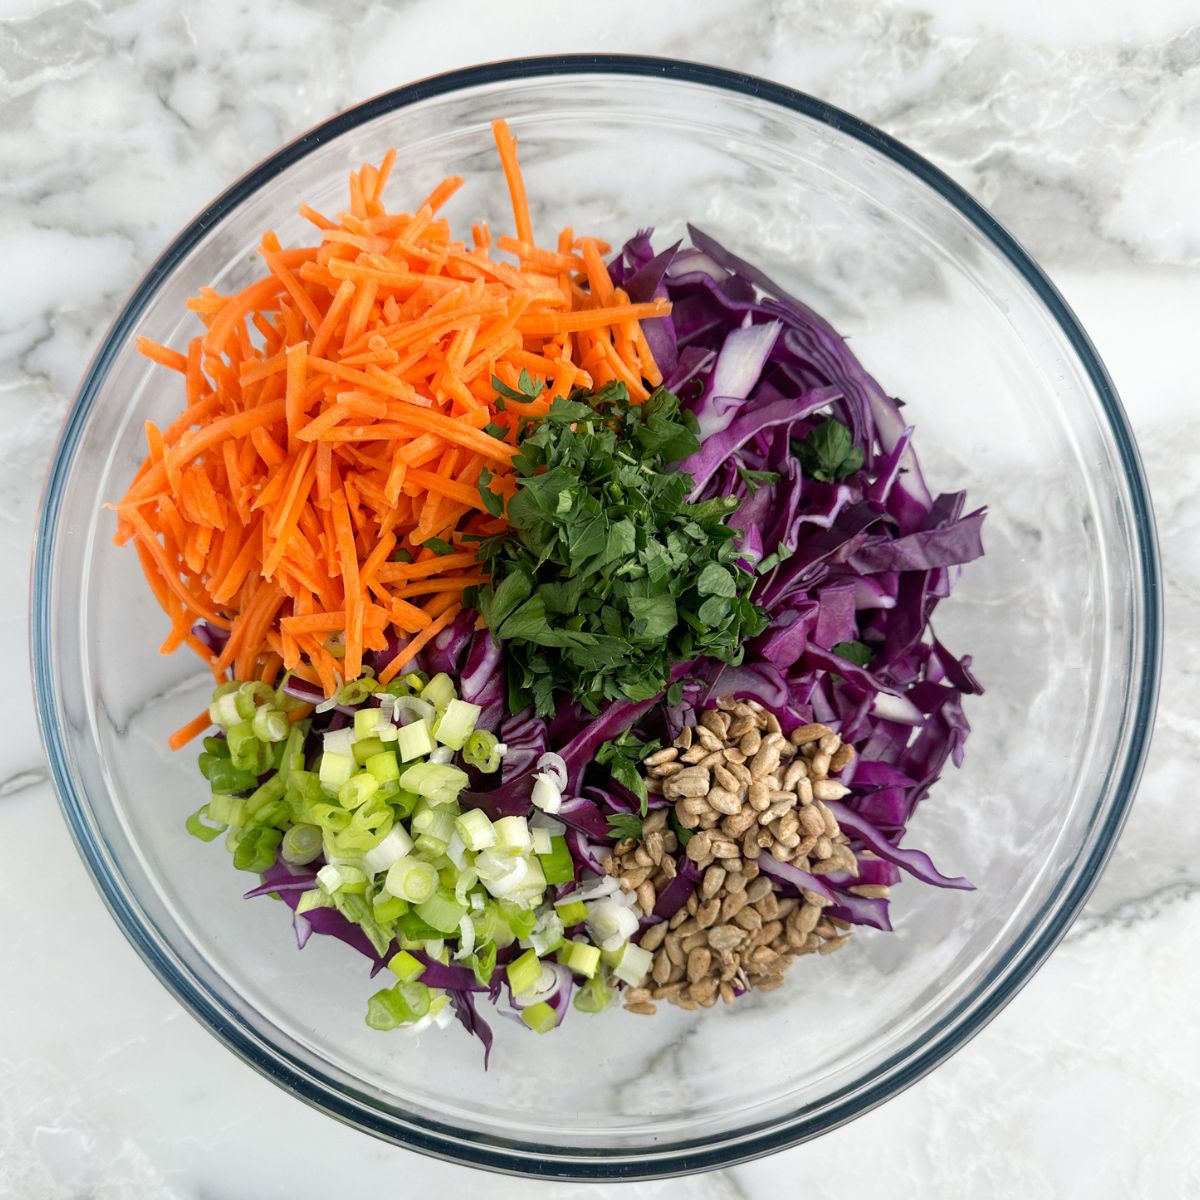 One bowl with shredded cabbage, carrots, green onions, parsley, and sunflower seeds. 